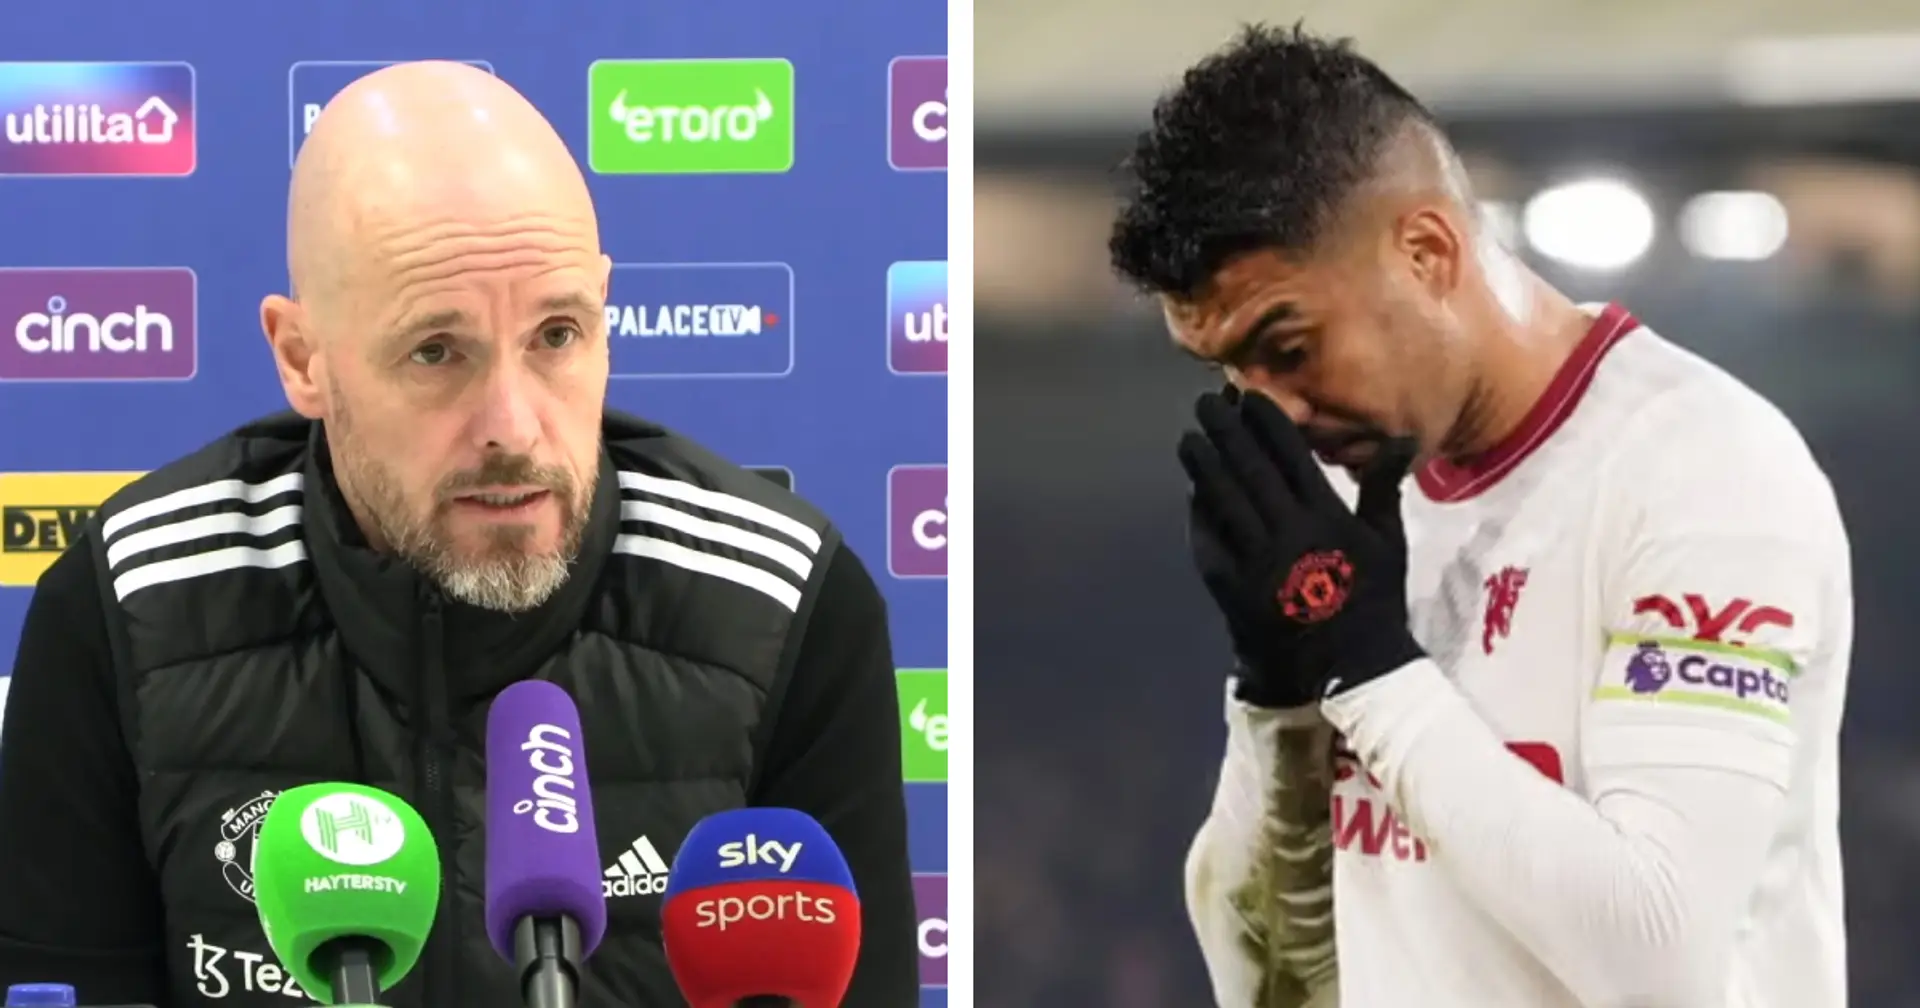 'You can't put this to one player': Erik ten Hag refuses to point fingers after Crystal Palace humiliation